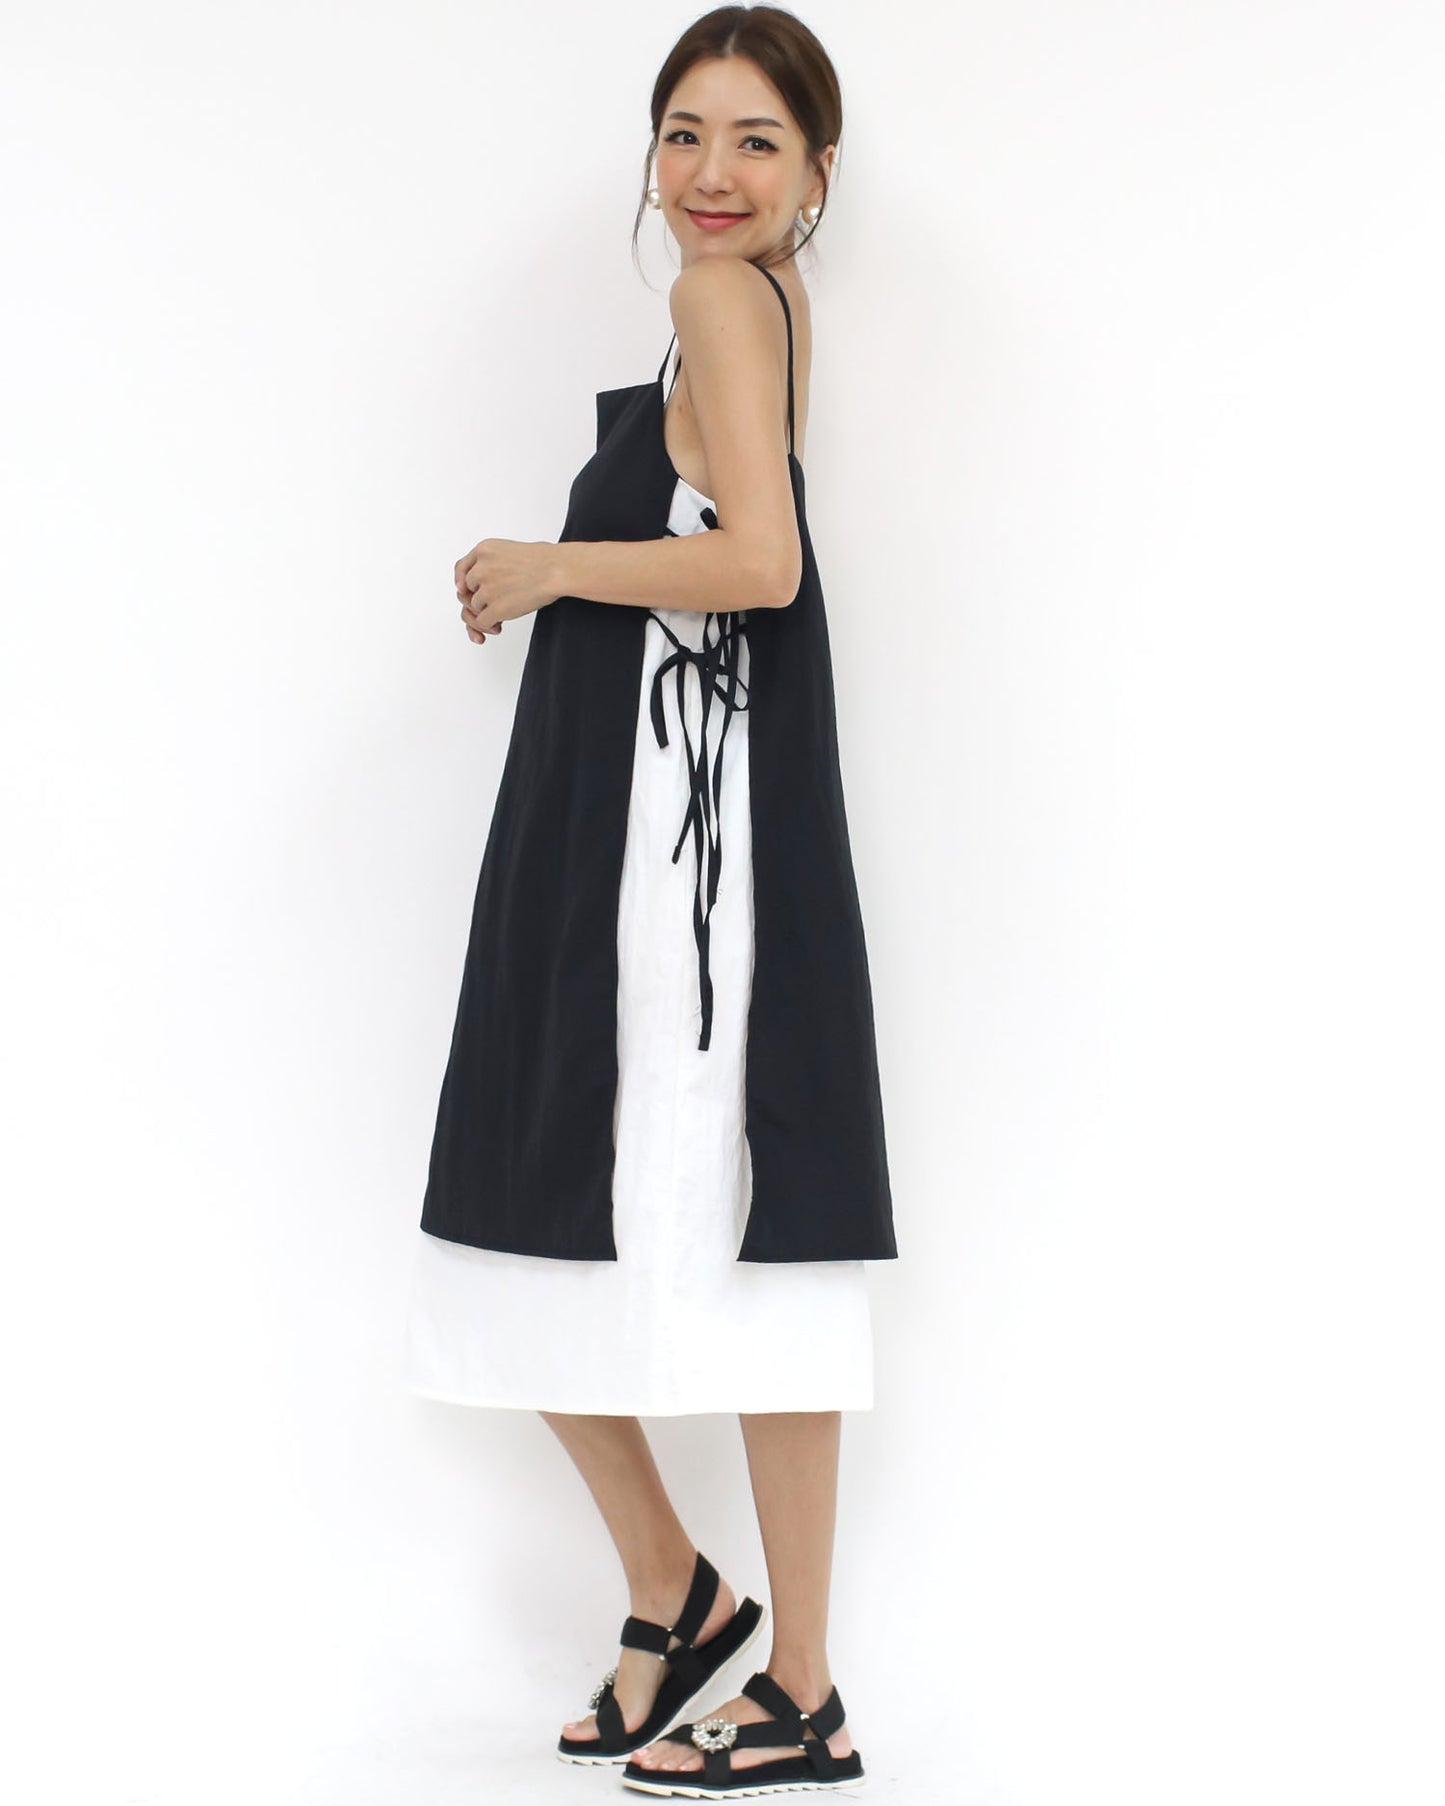 black & ivory texture tie-up sides strappy dress